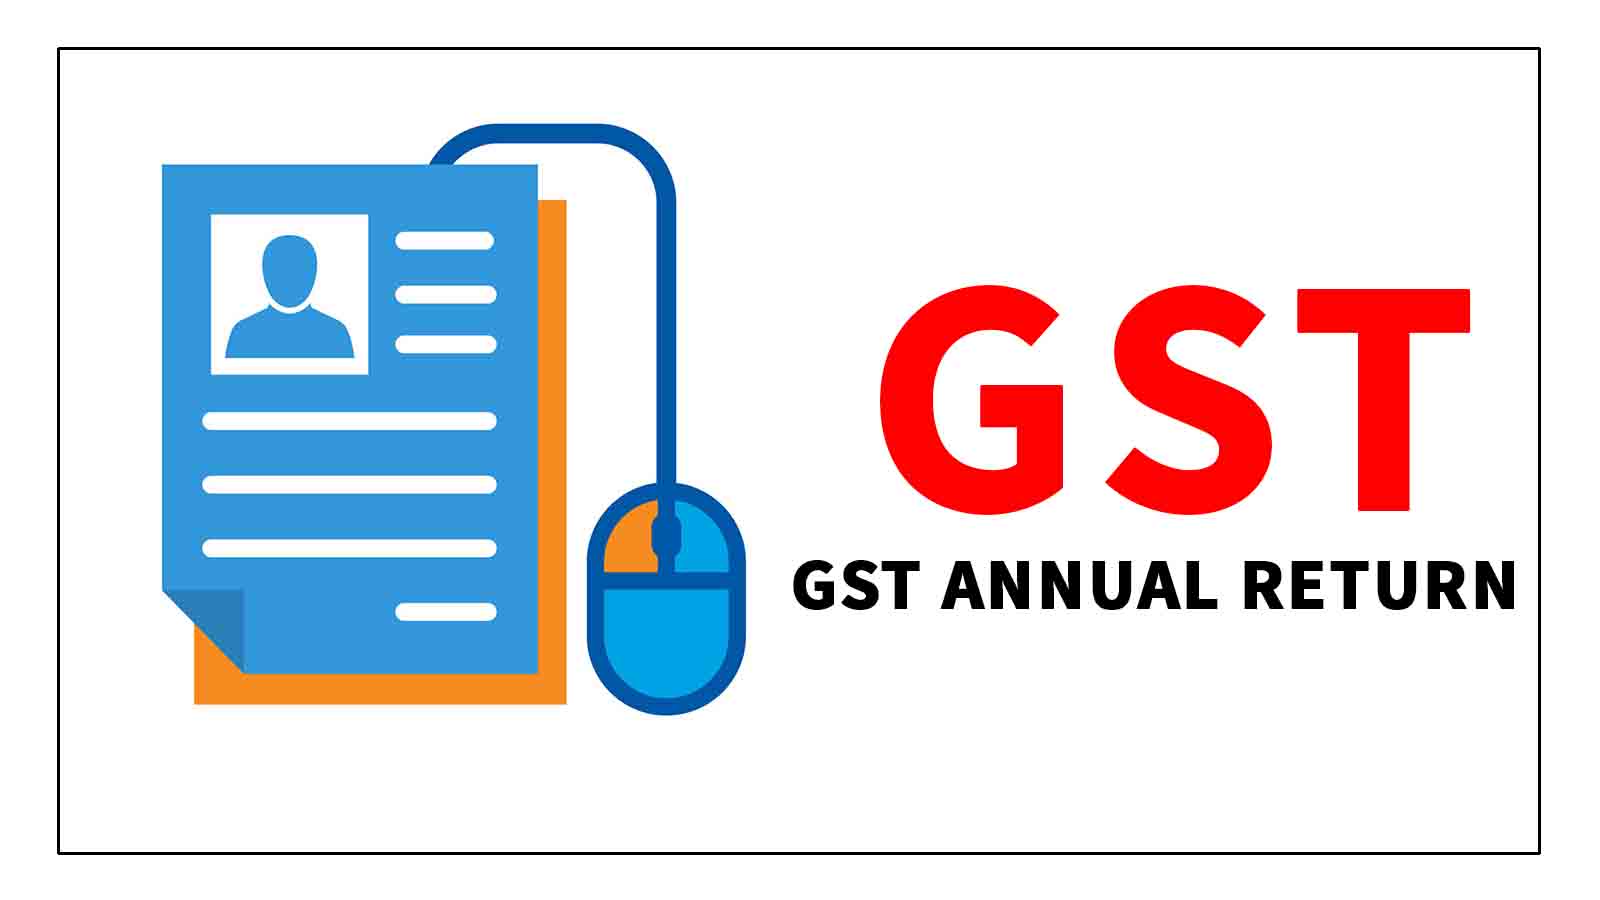 Taxpayers having AATO upto Rs. 2 crores exempt from filing Form GSTR-9/9A for the FY 2021-22